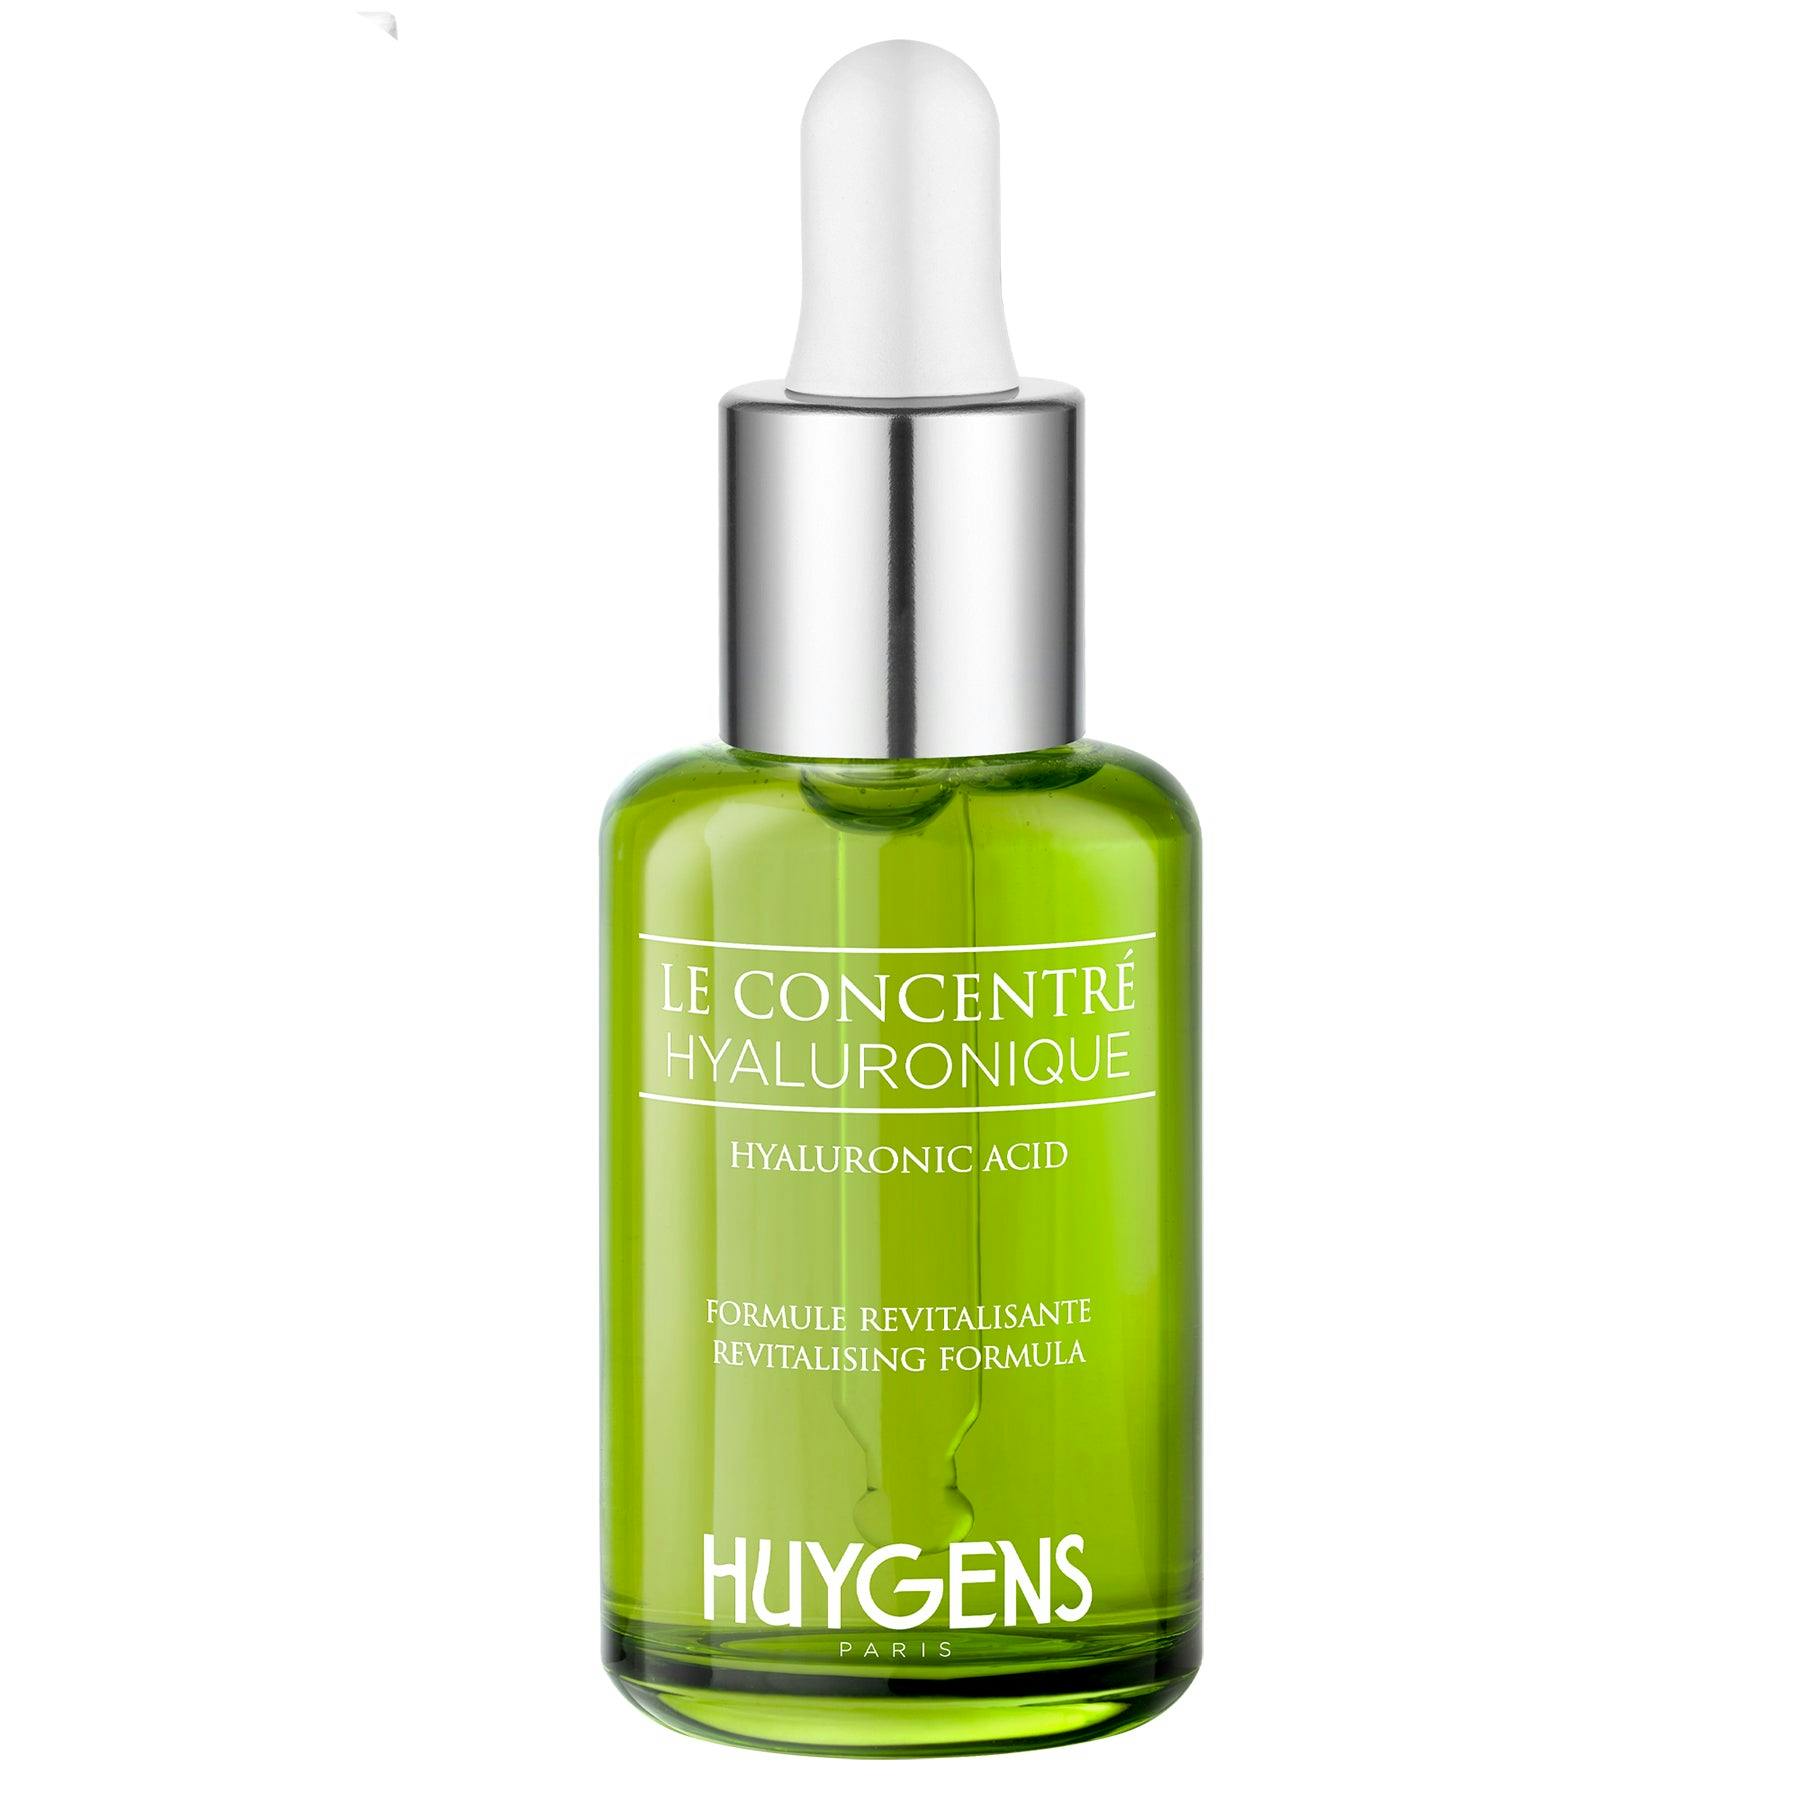 Huygens Hyaluronic Acid Concentrate Huygens Hyaluronic Acid Concentrate 1